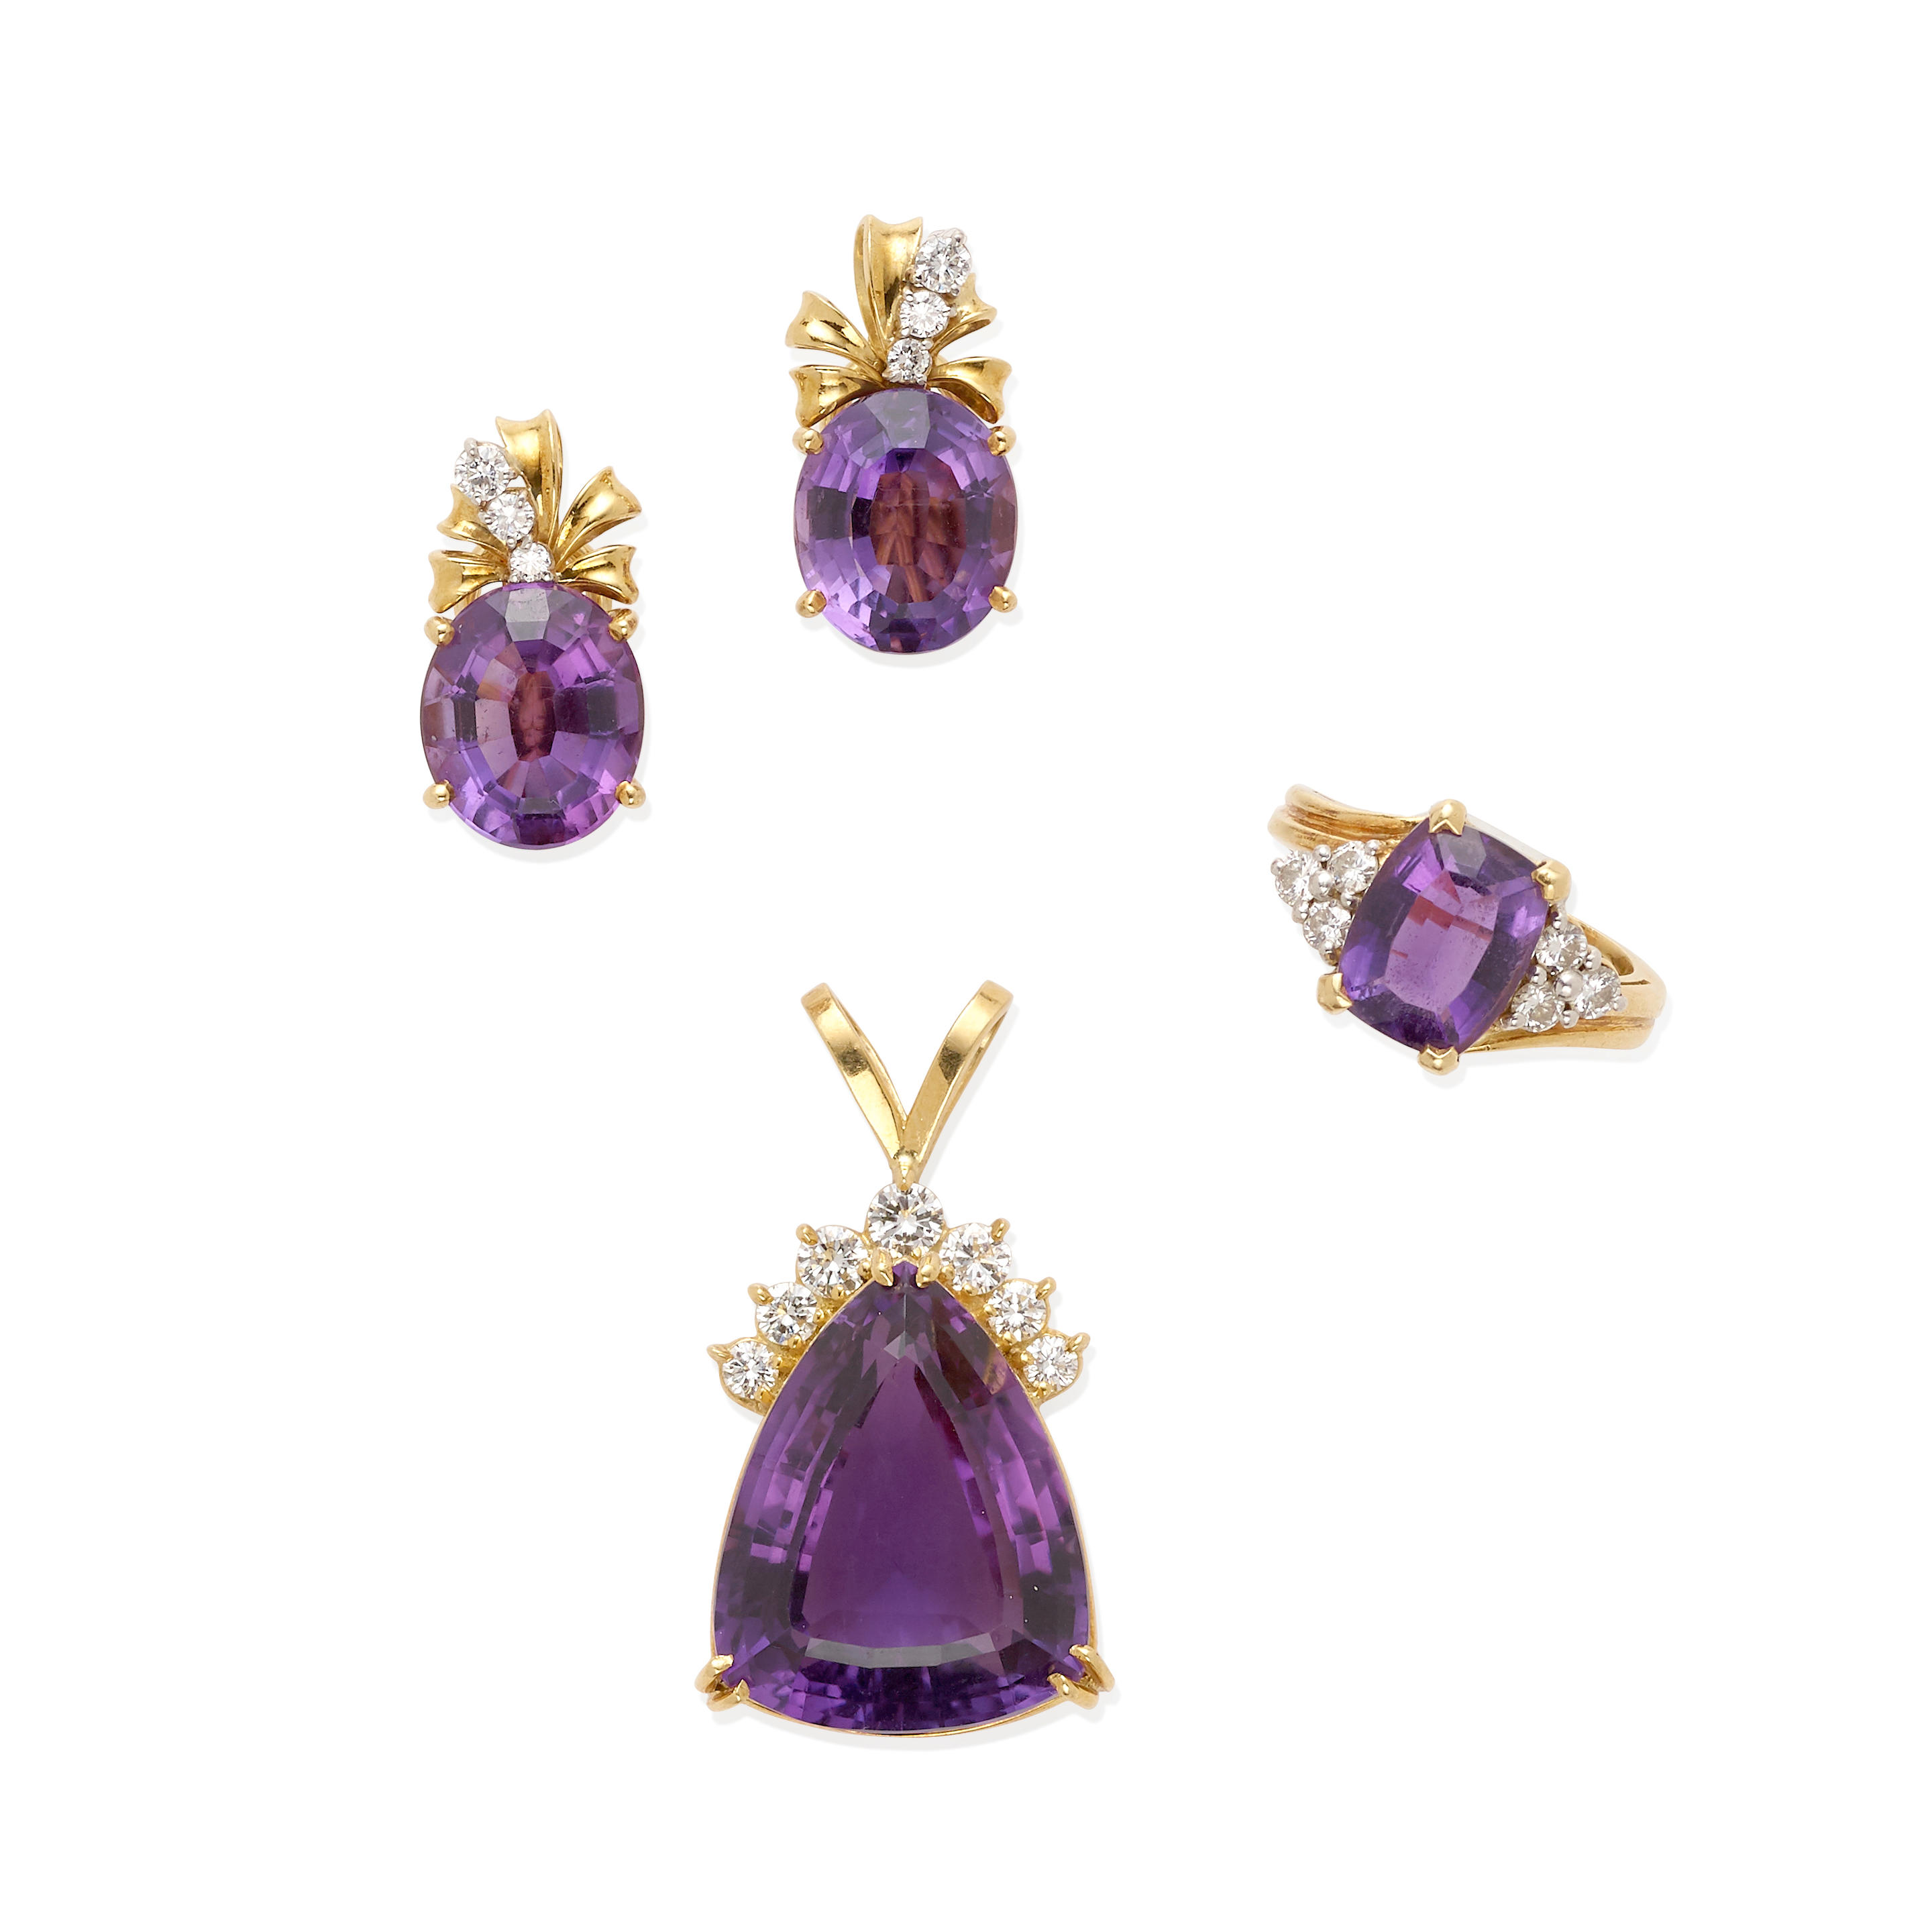 Group of Gold, Amethyst and Diamond Jewelry